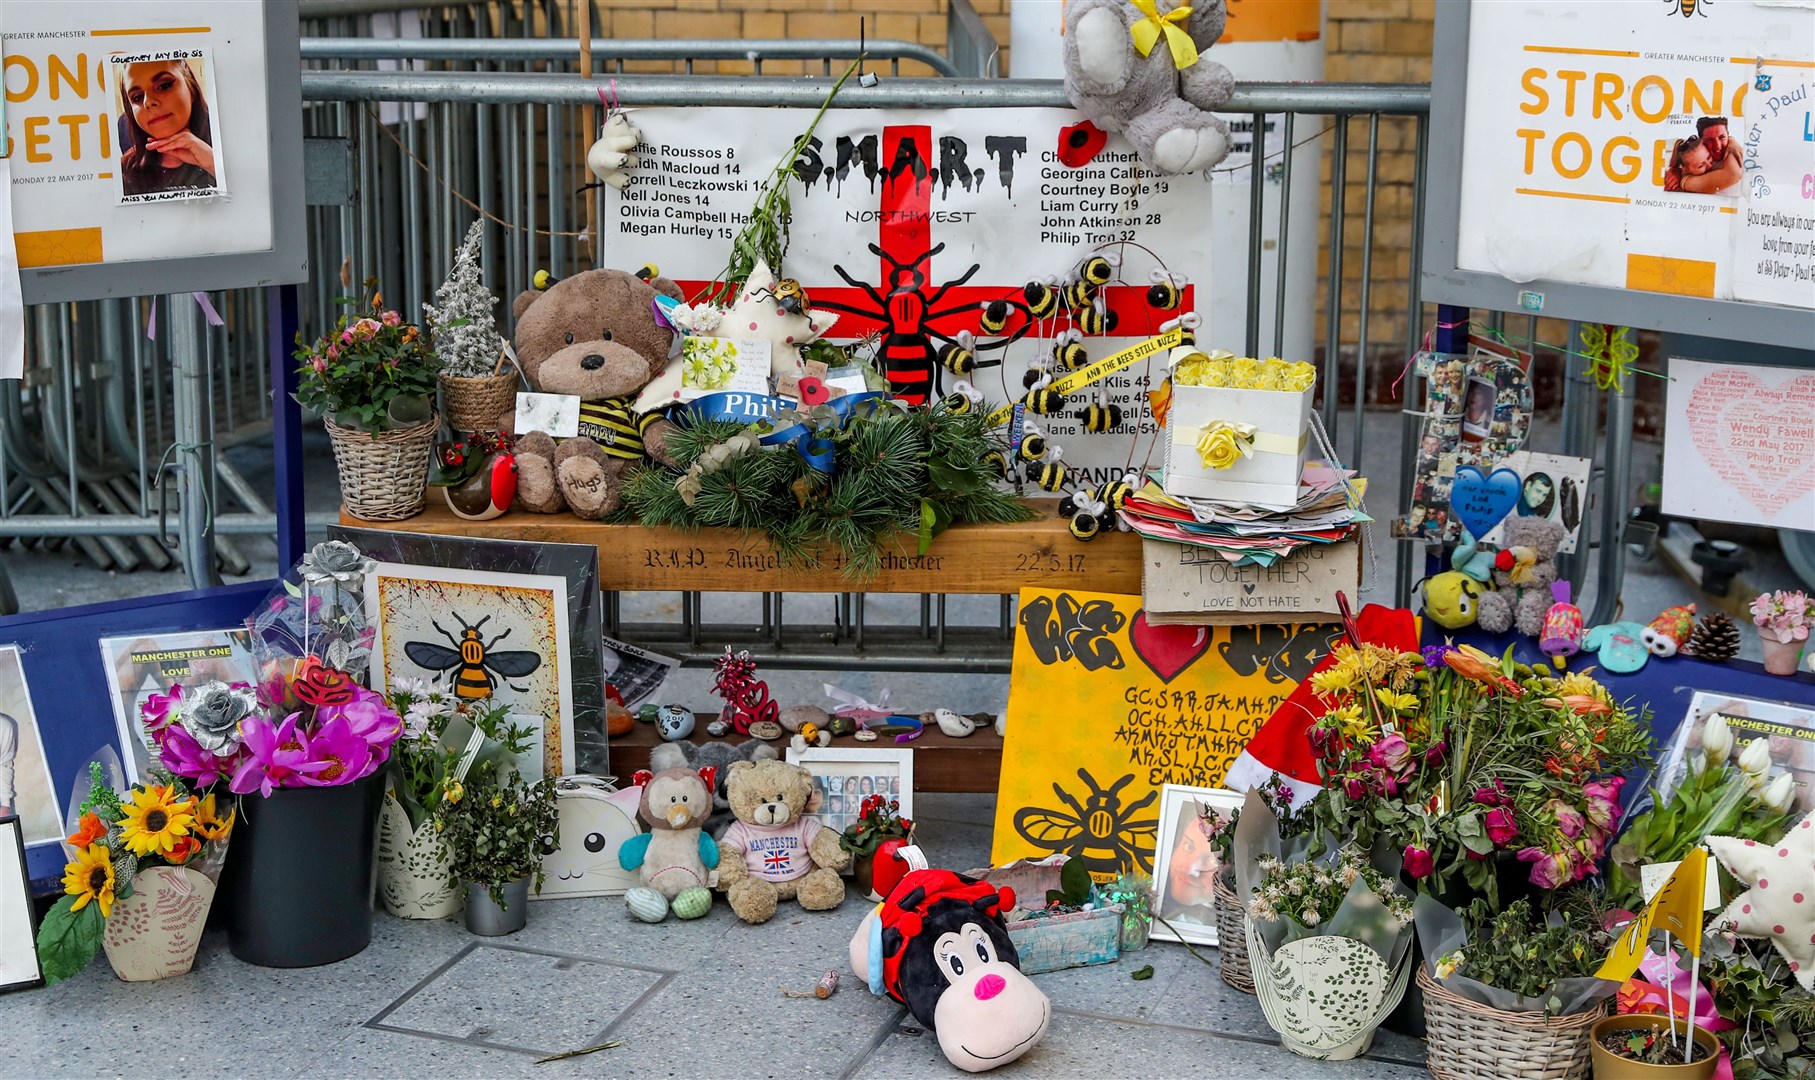 A memorial to the victims of the Manchester Arena bombing at Victoria Station in Manchester (Peter Byrne/PA)